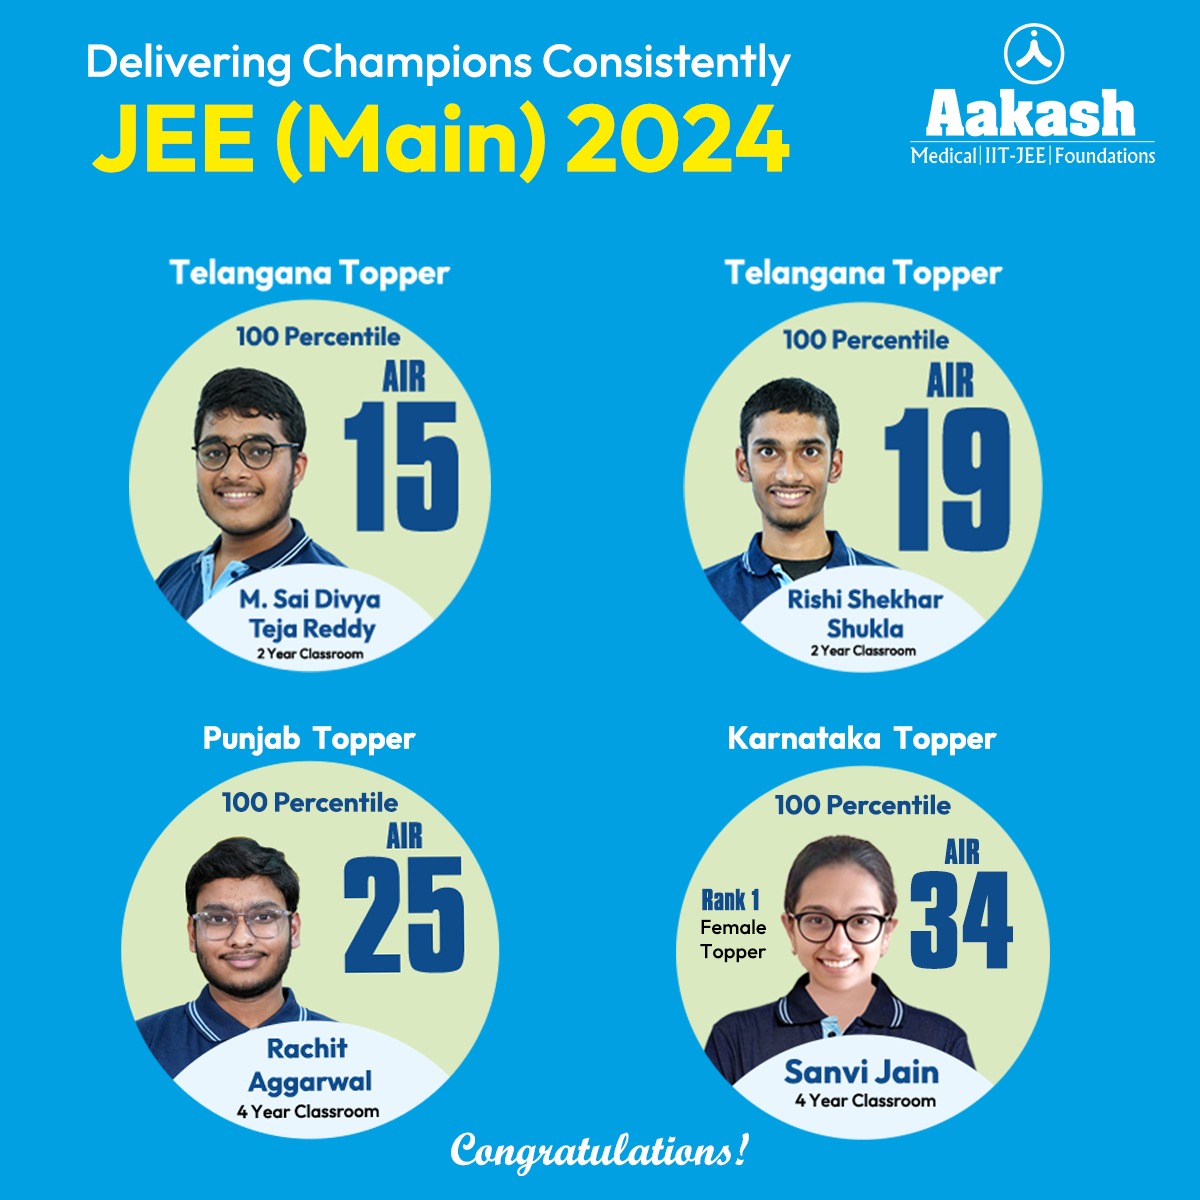 Outstanding Performance by Aakashians in JEE (Main) 2024! 🏆🥇 Congratulations to all 👏 👏 👏 #jeemain #jee2024 #jeetopper #jeepreparation #jee #aakashinstitute